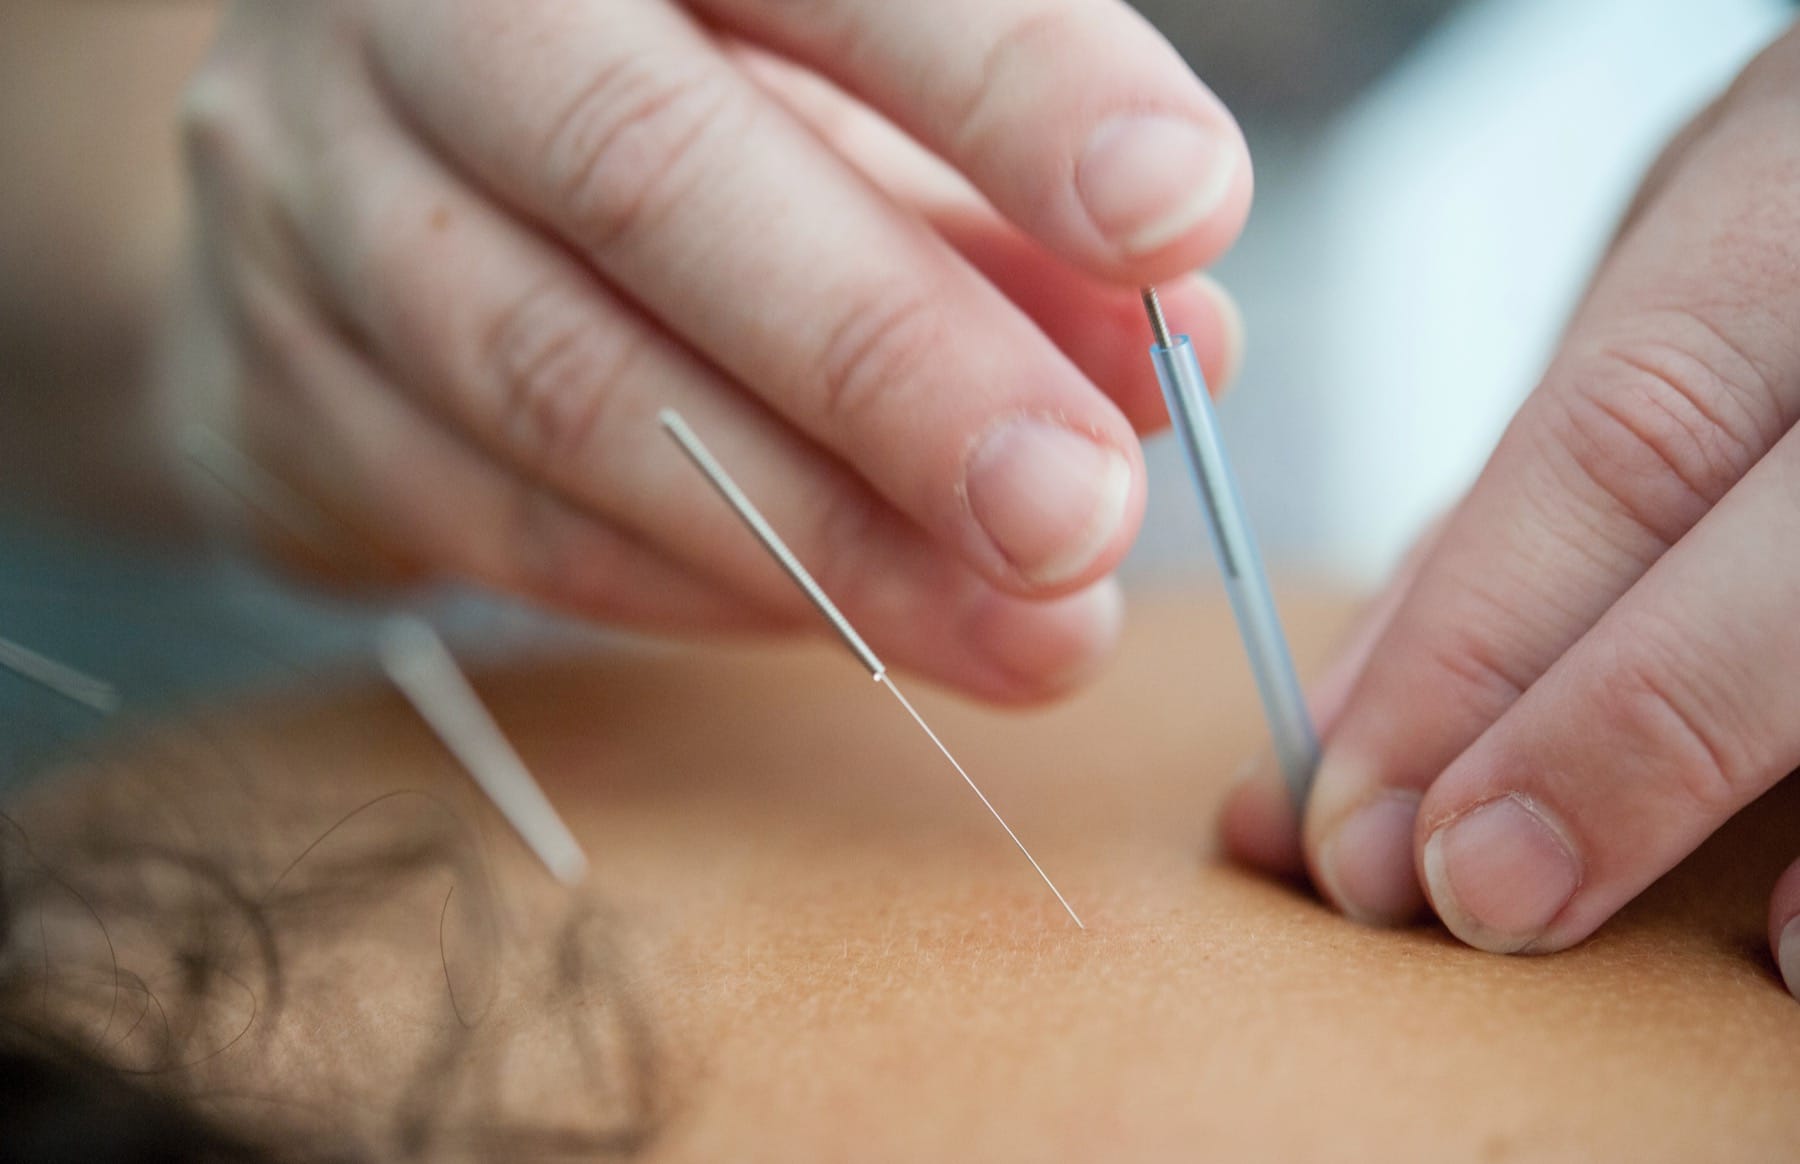 Acupuncture & Cupping